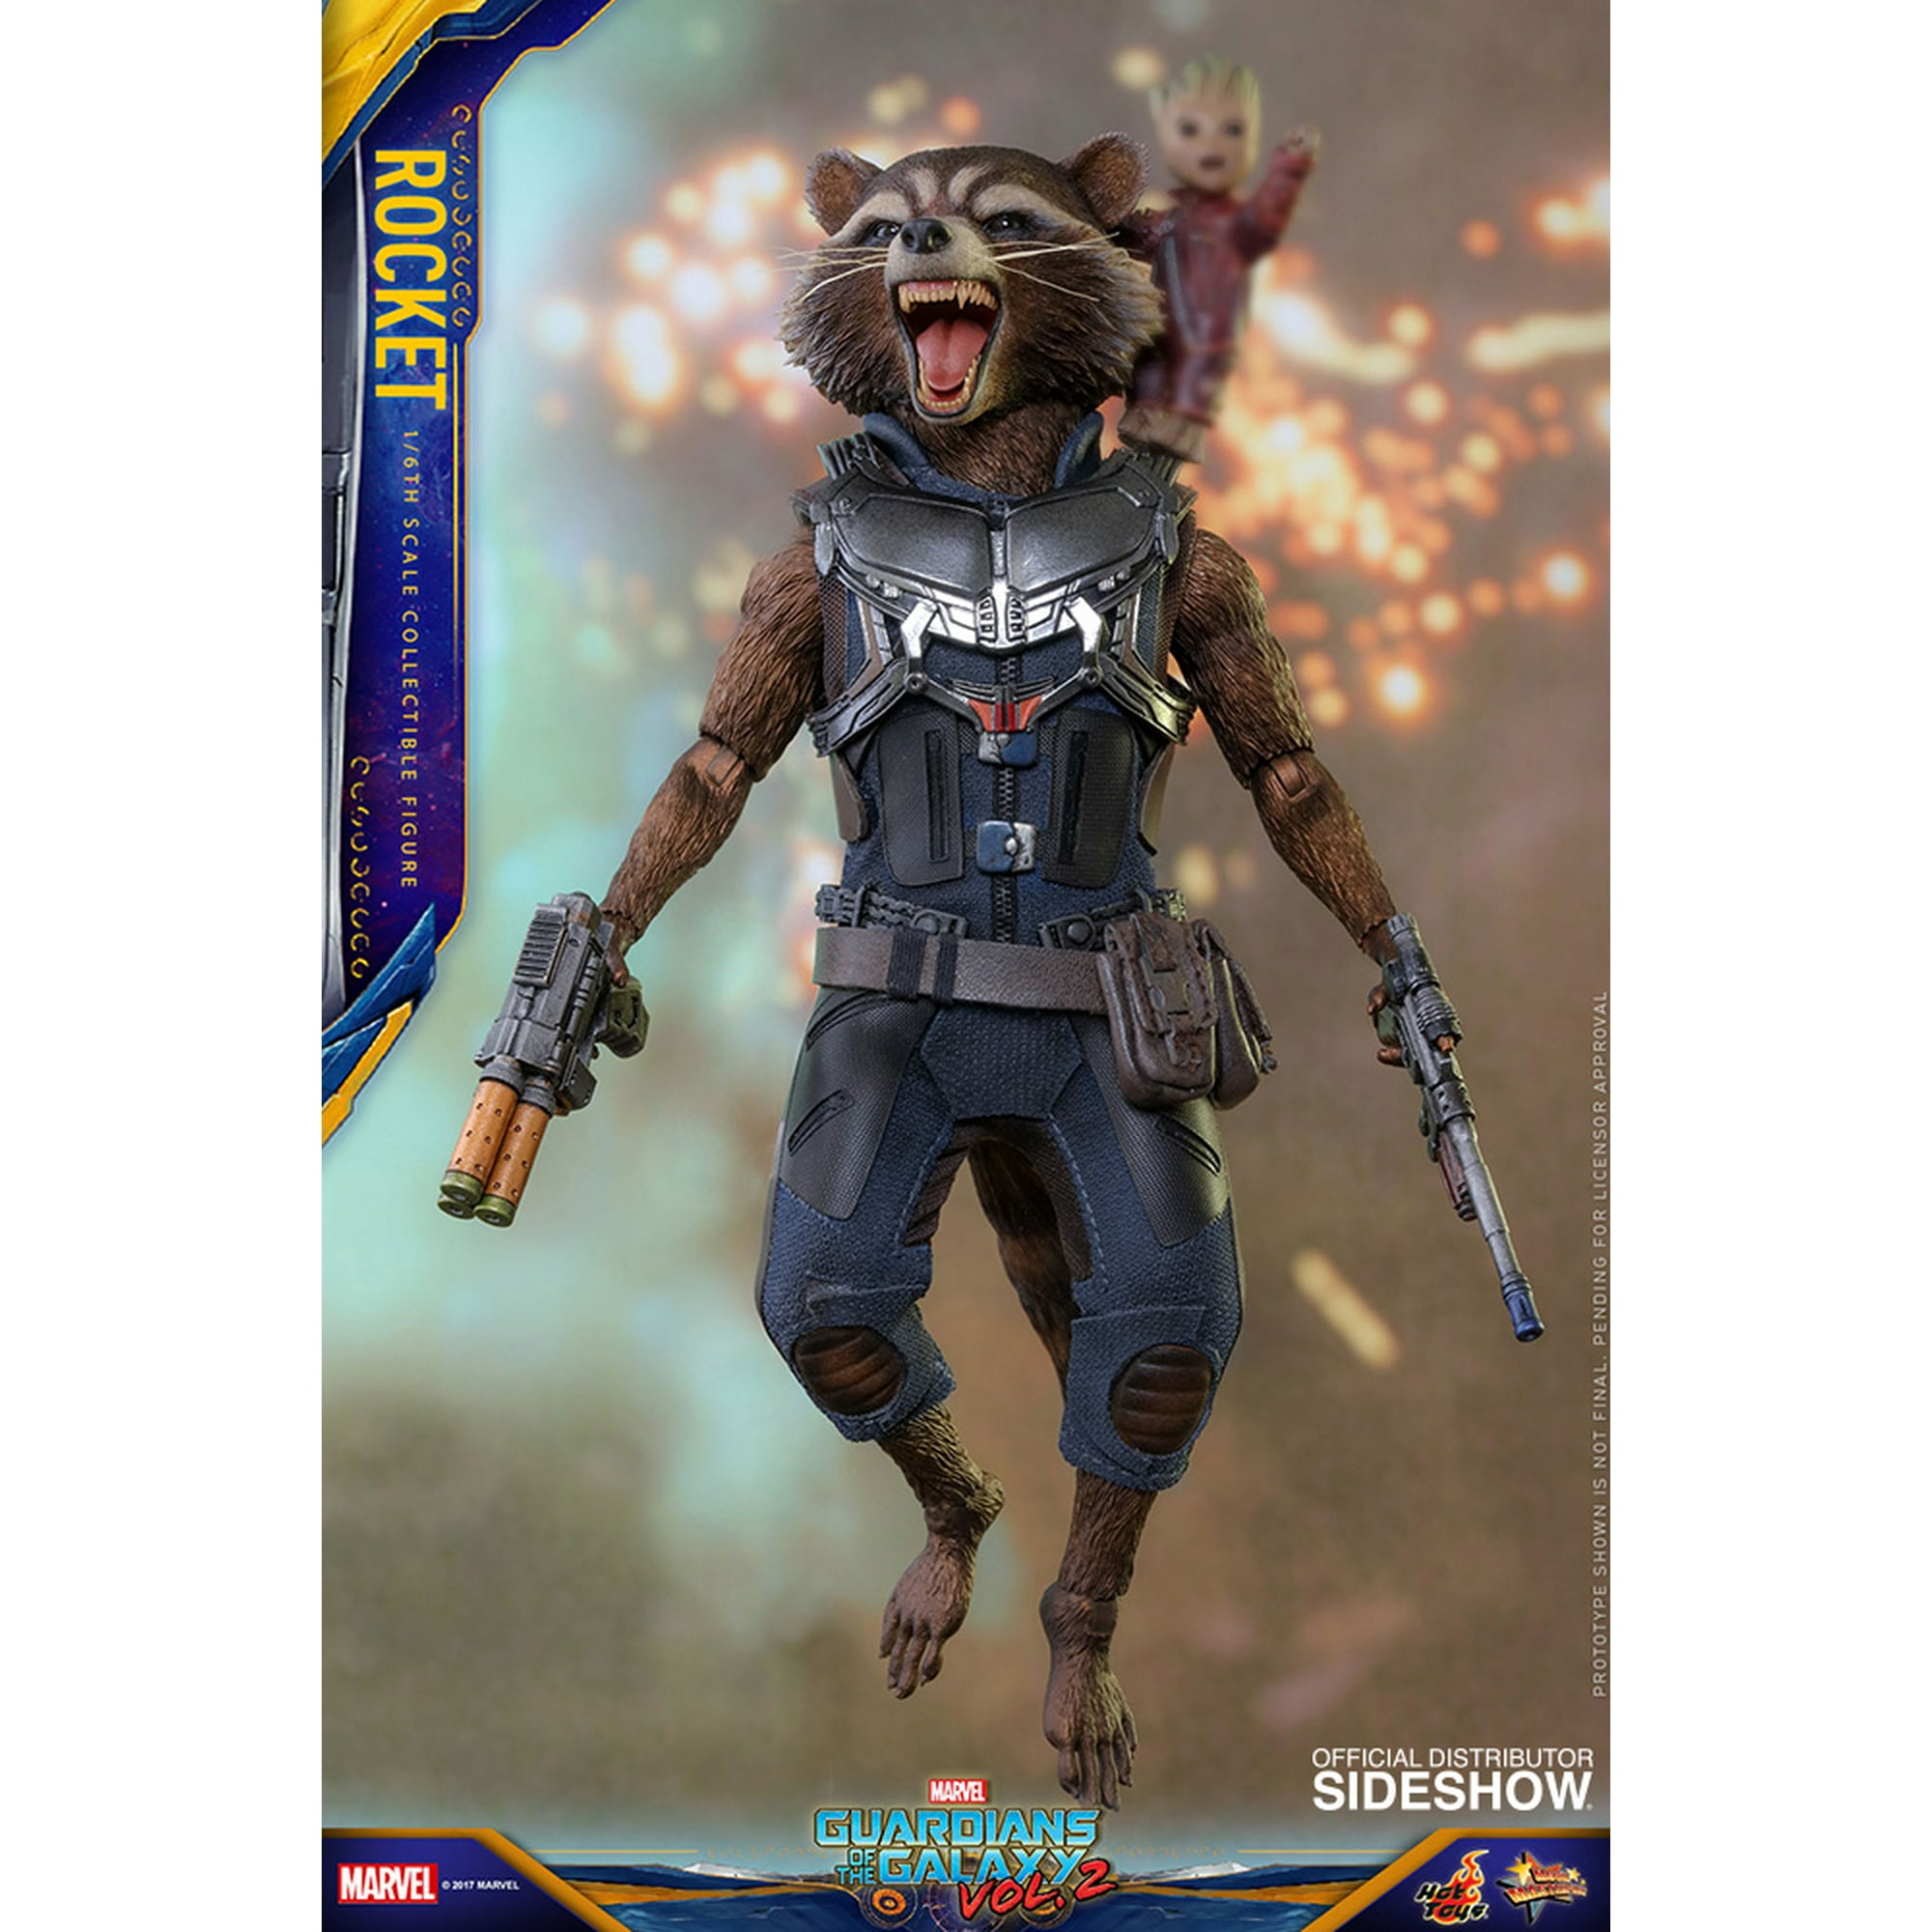 Guardians Of The Galaxy Vol 2 6 Inch Action Figure Movie Masterpiece 16 Scale Series Rocket Raccoon Hot Toys 902964